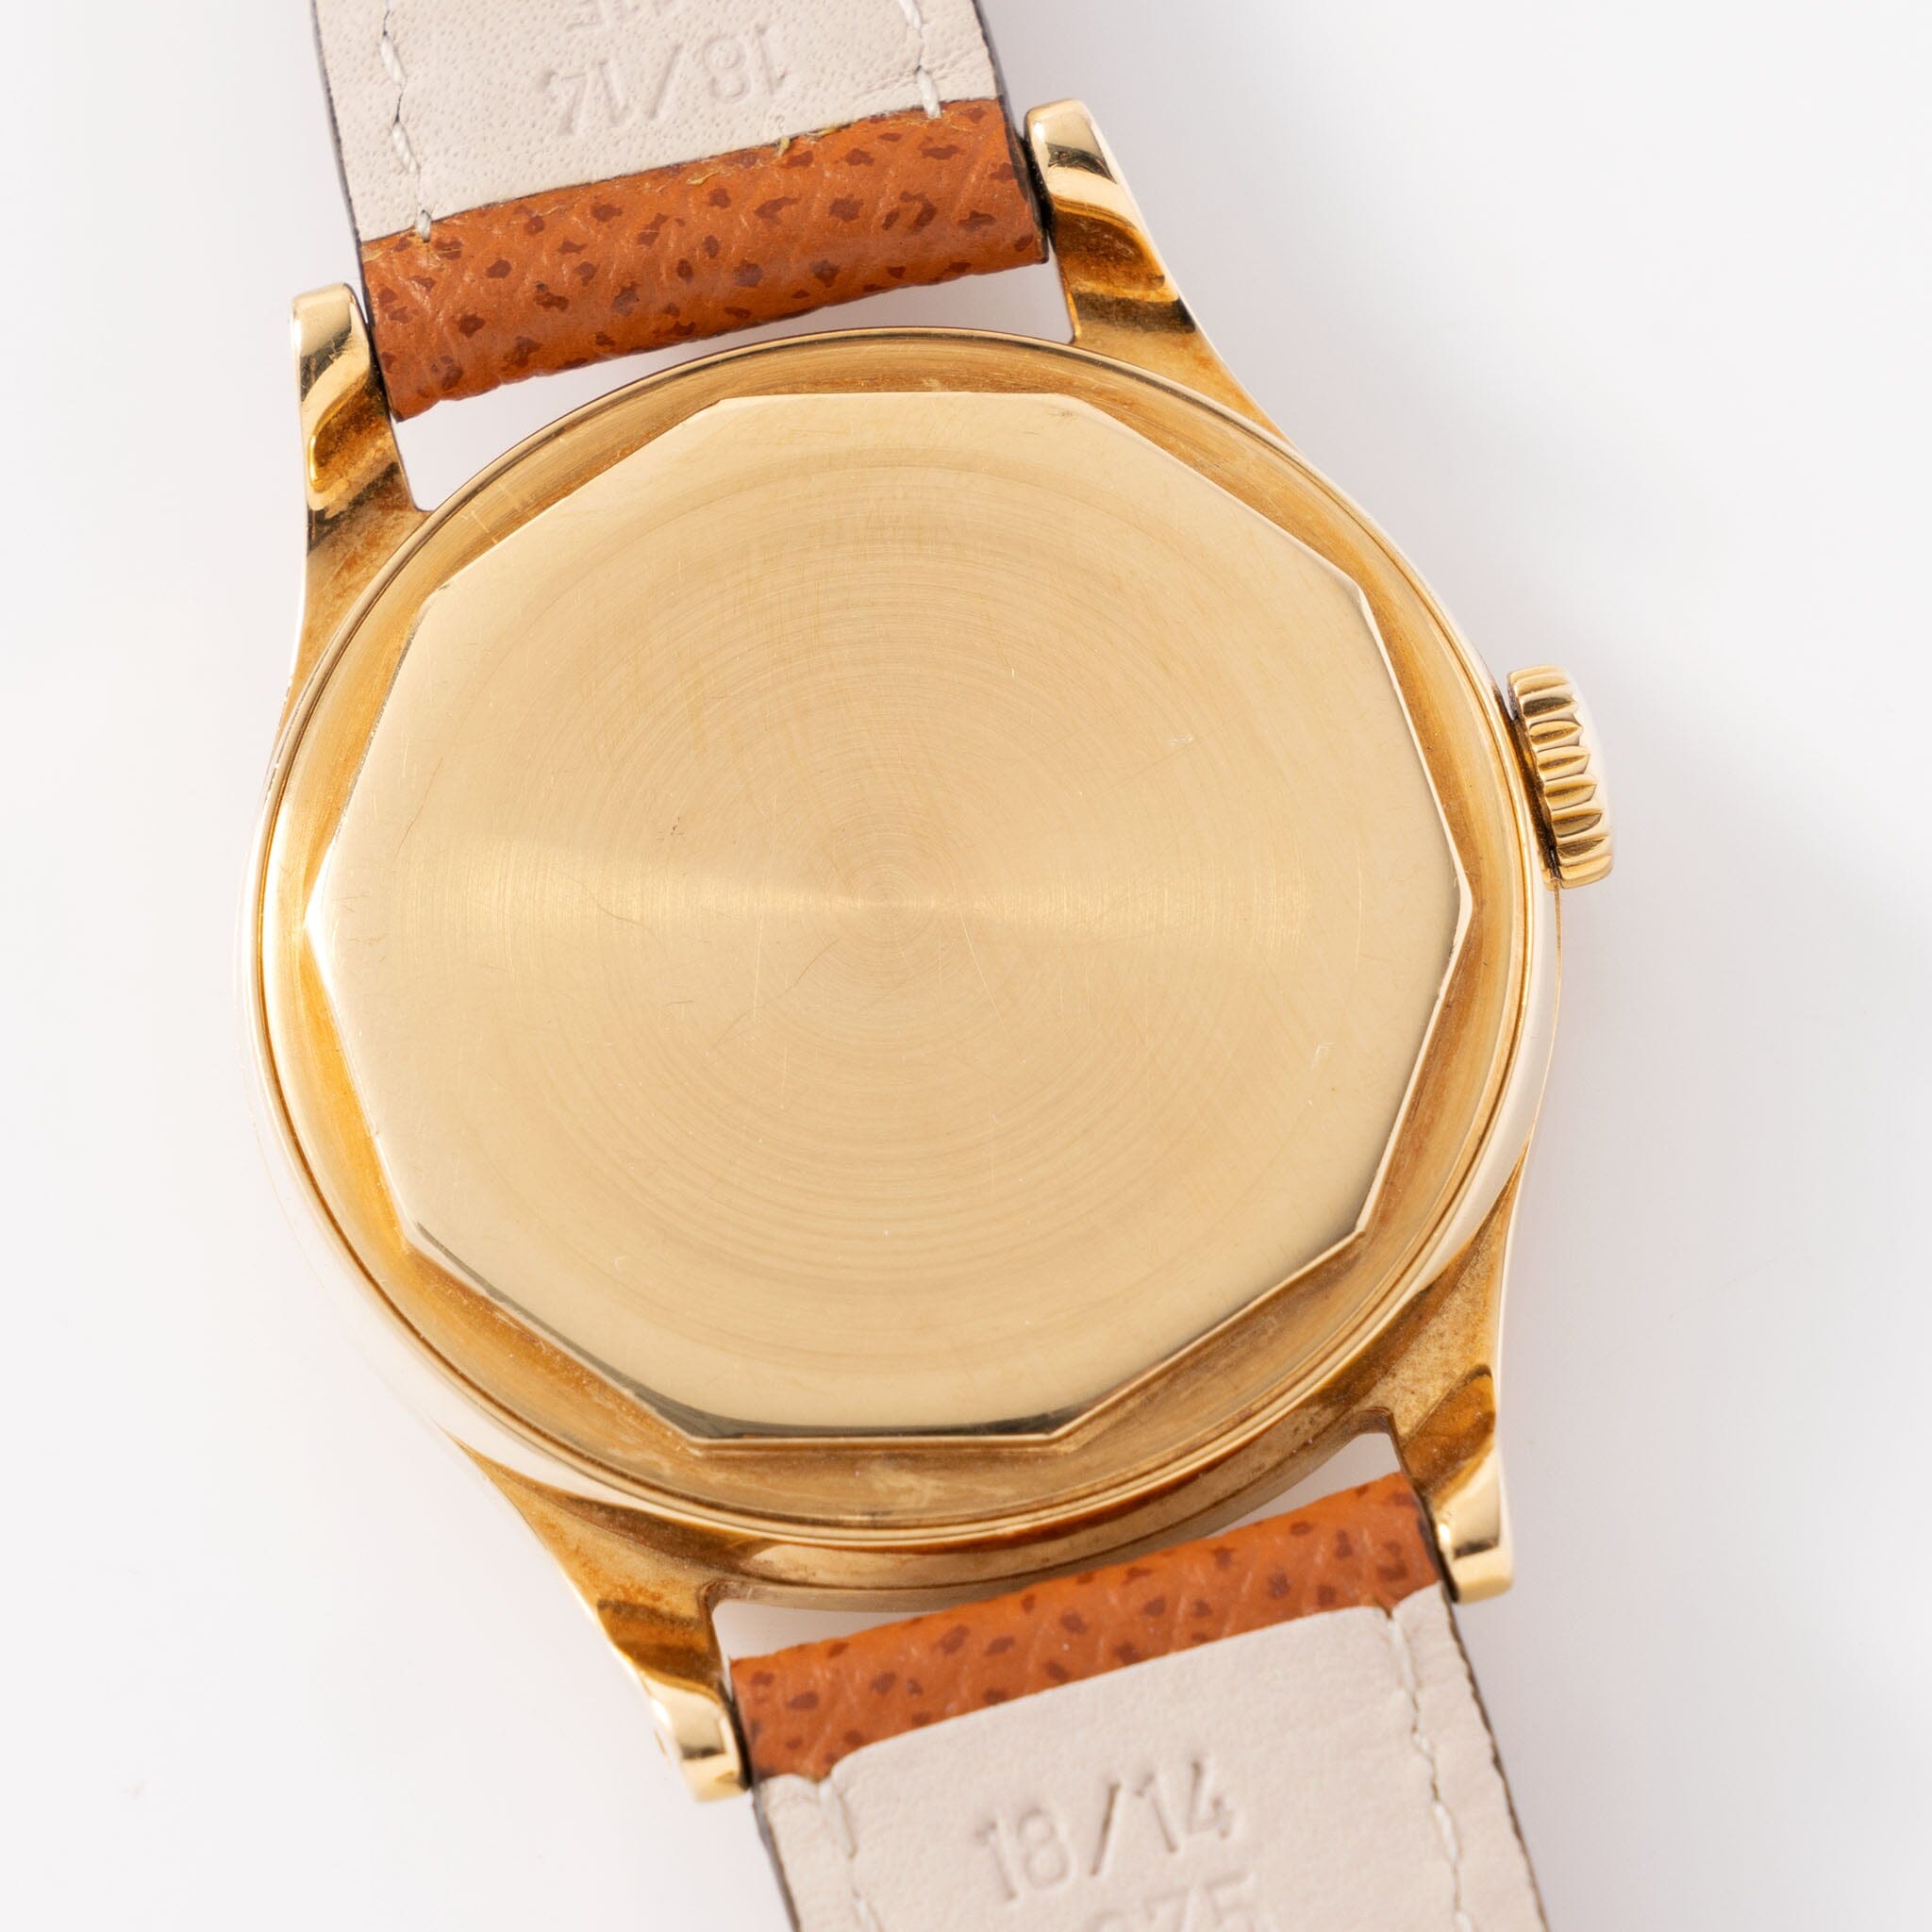 Patek Philippe Calatrava “Amagnetic” with Extract from the Archives Ref 2509